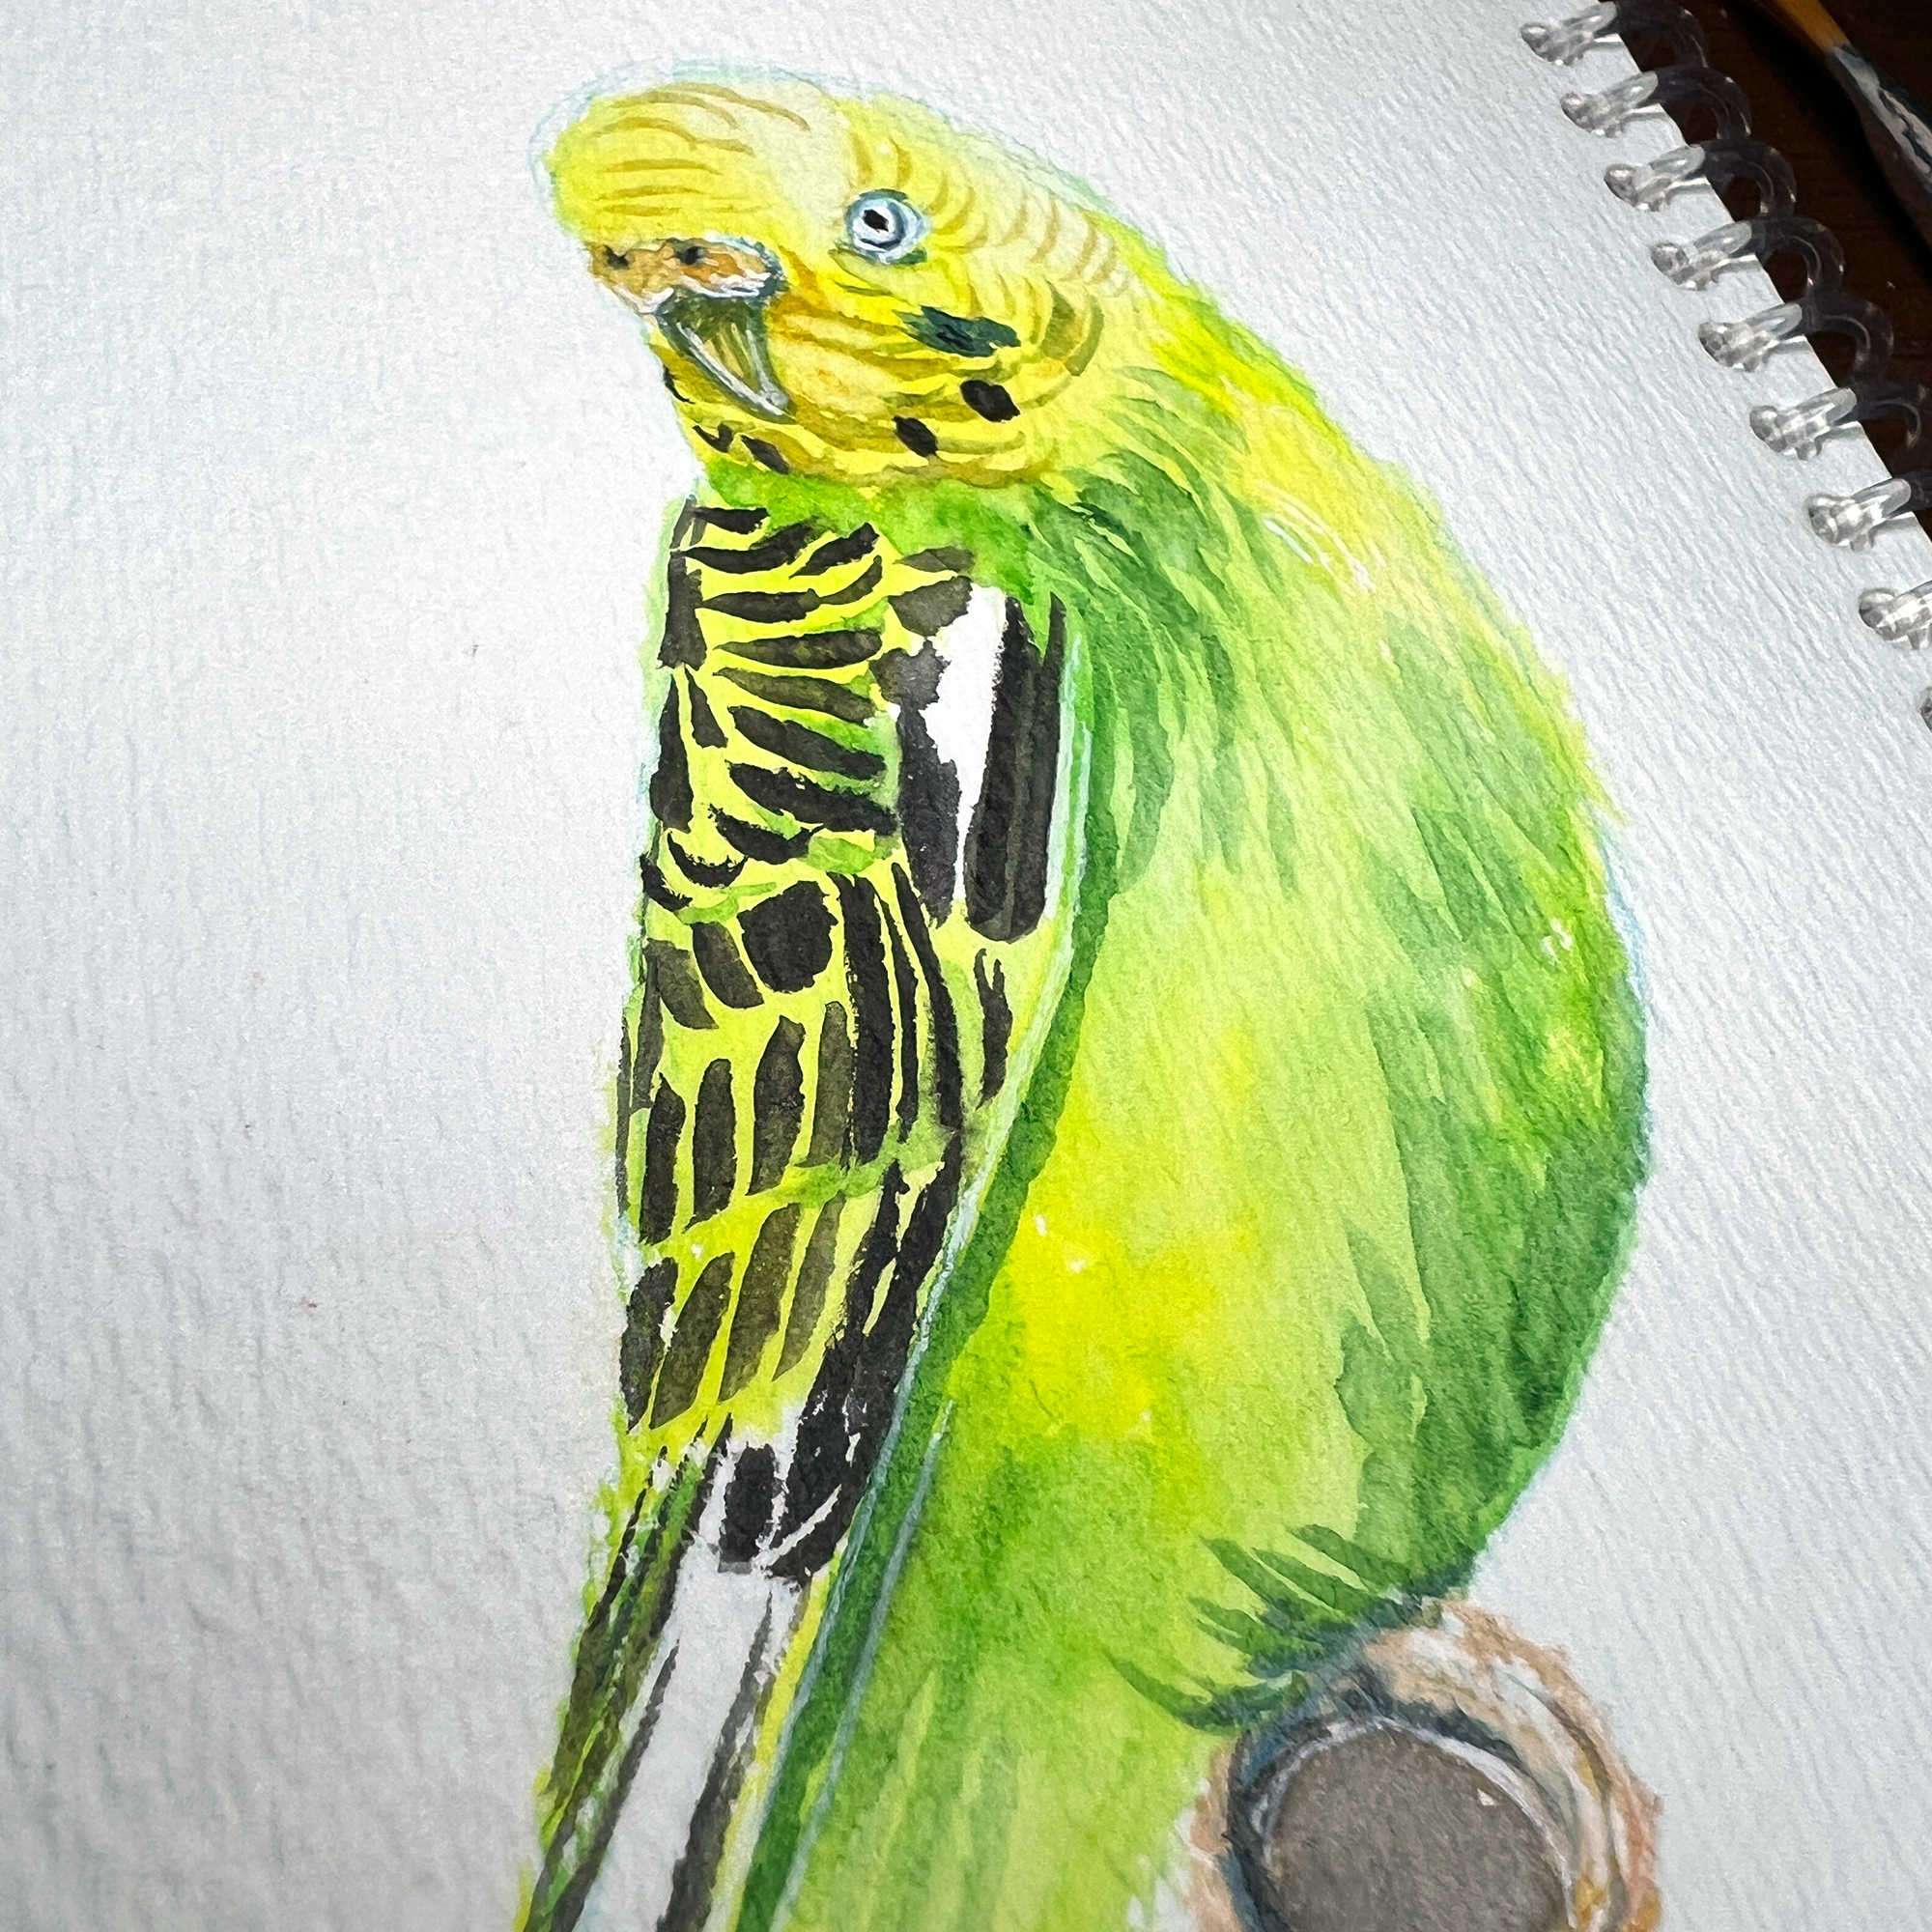 Close-up of a watercolor sketch of a green parakeet on a spiral notebook.